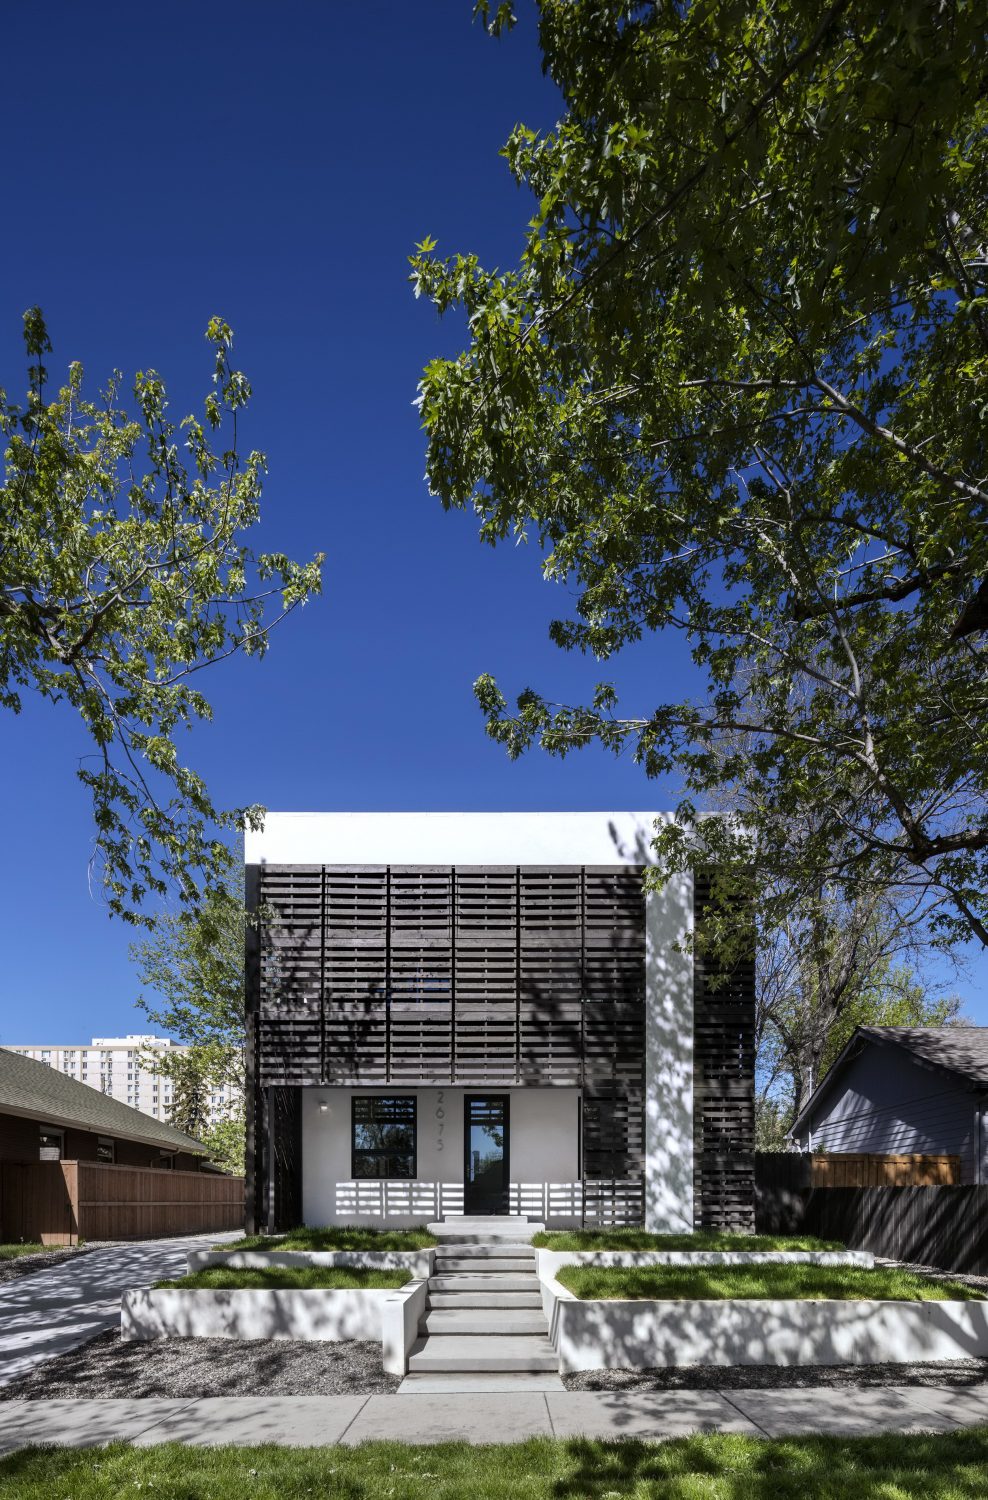 Denver Pallet House by Meridian 105 Architecture